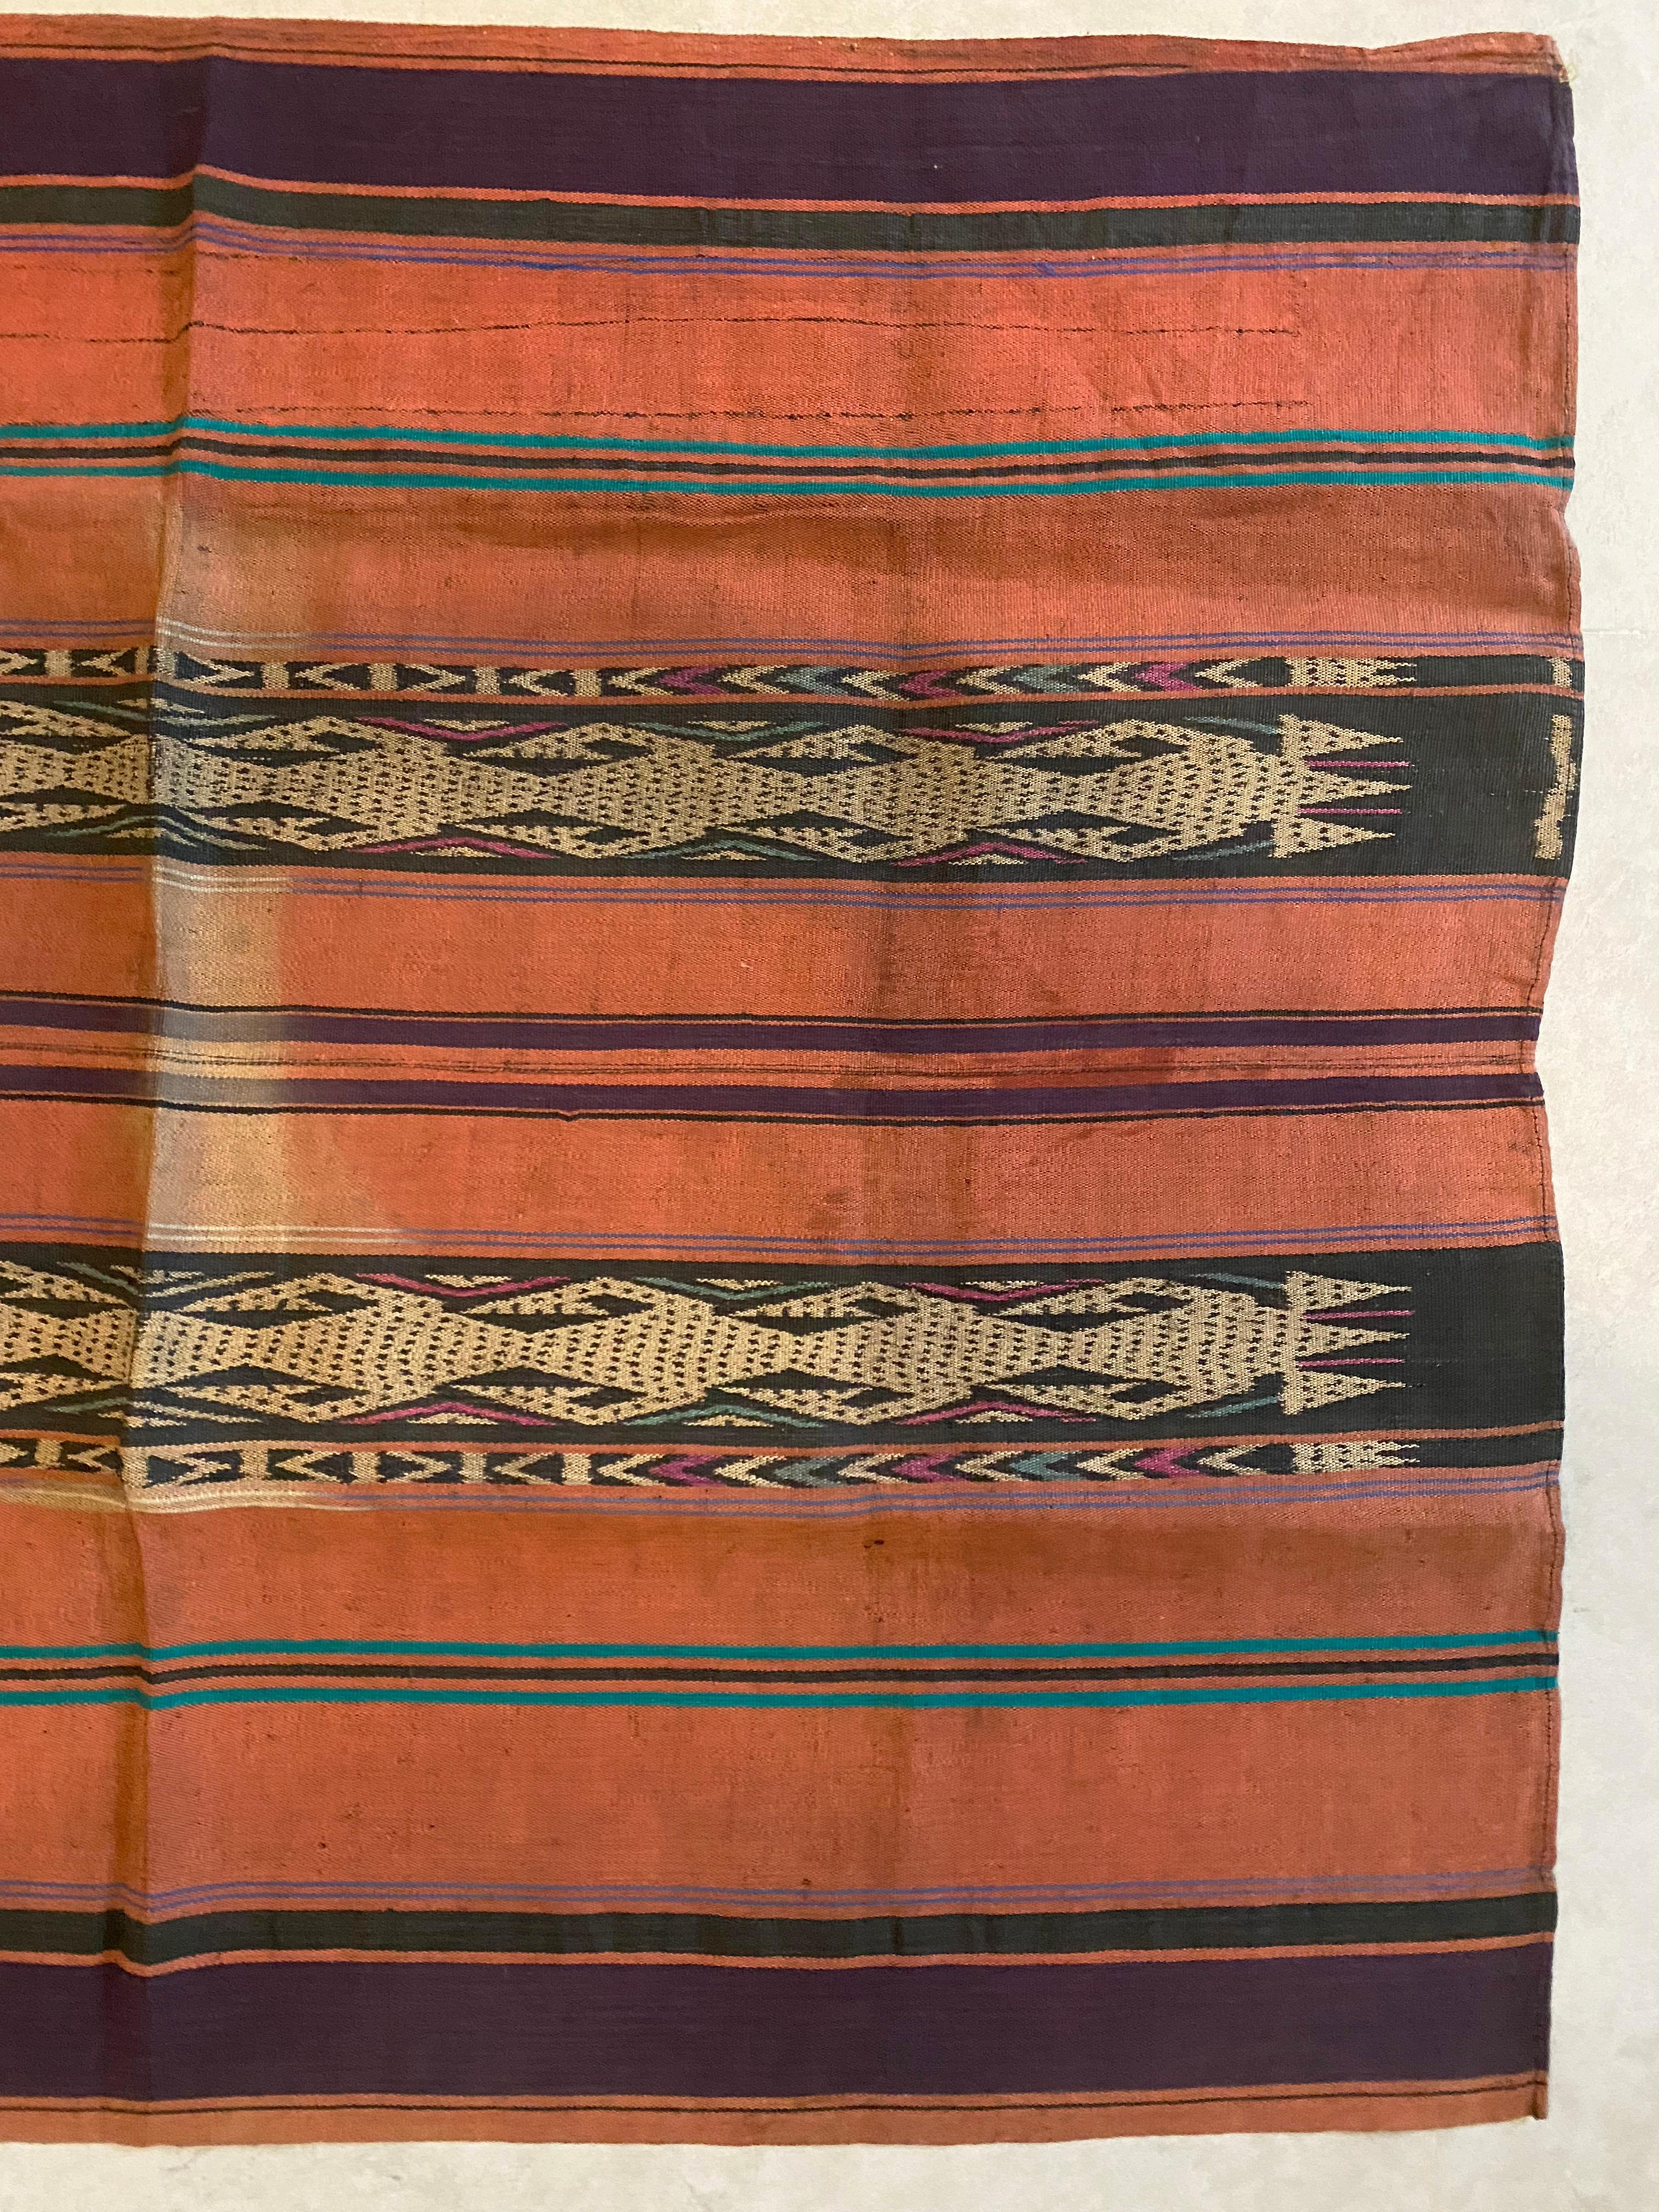 This Ikat textile originates from the Island of Kalimantan, Indonesia. It is hand-woven using naturally dyed yarns via a method passed on through generations amid the Dayak Tribes scattered throughout the island. It features a stunning orange